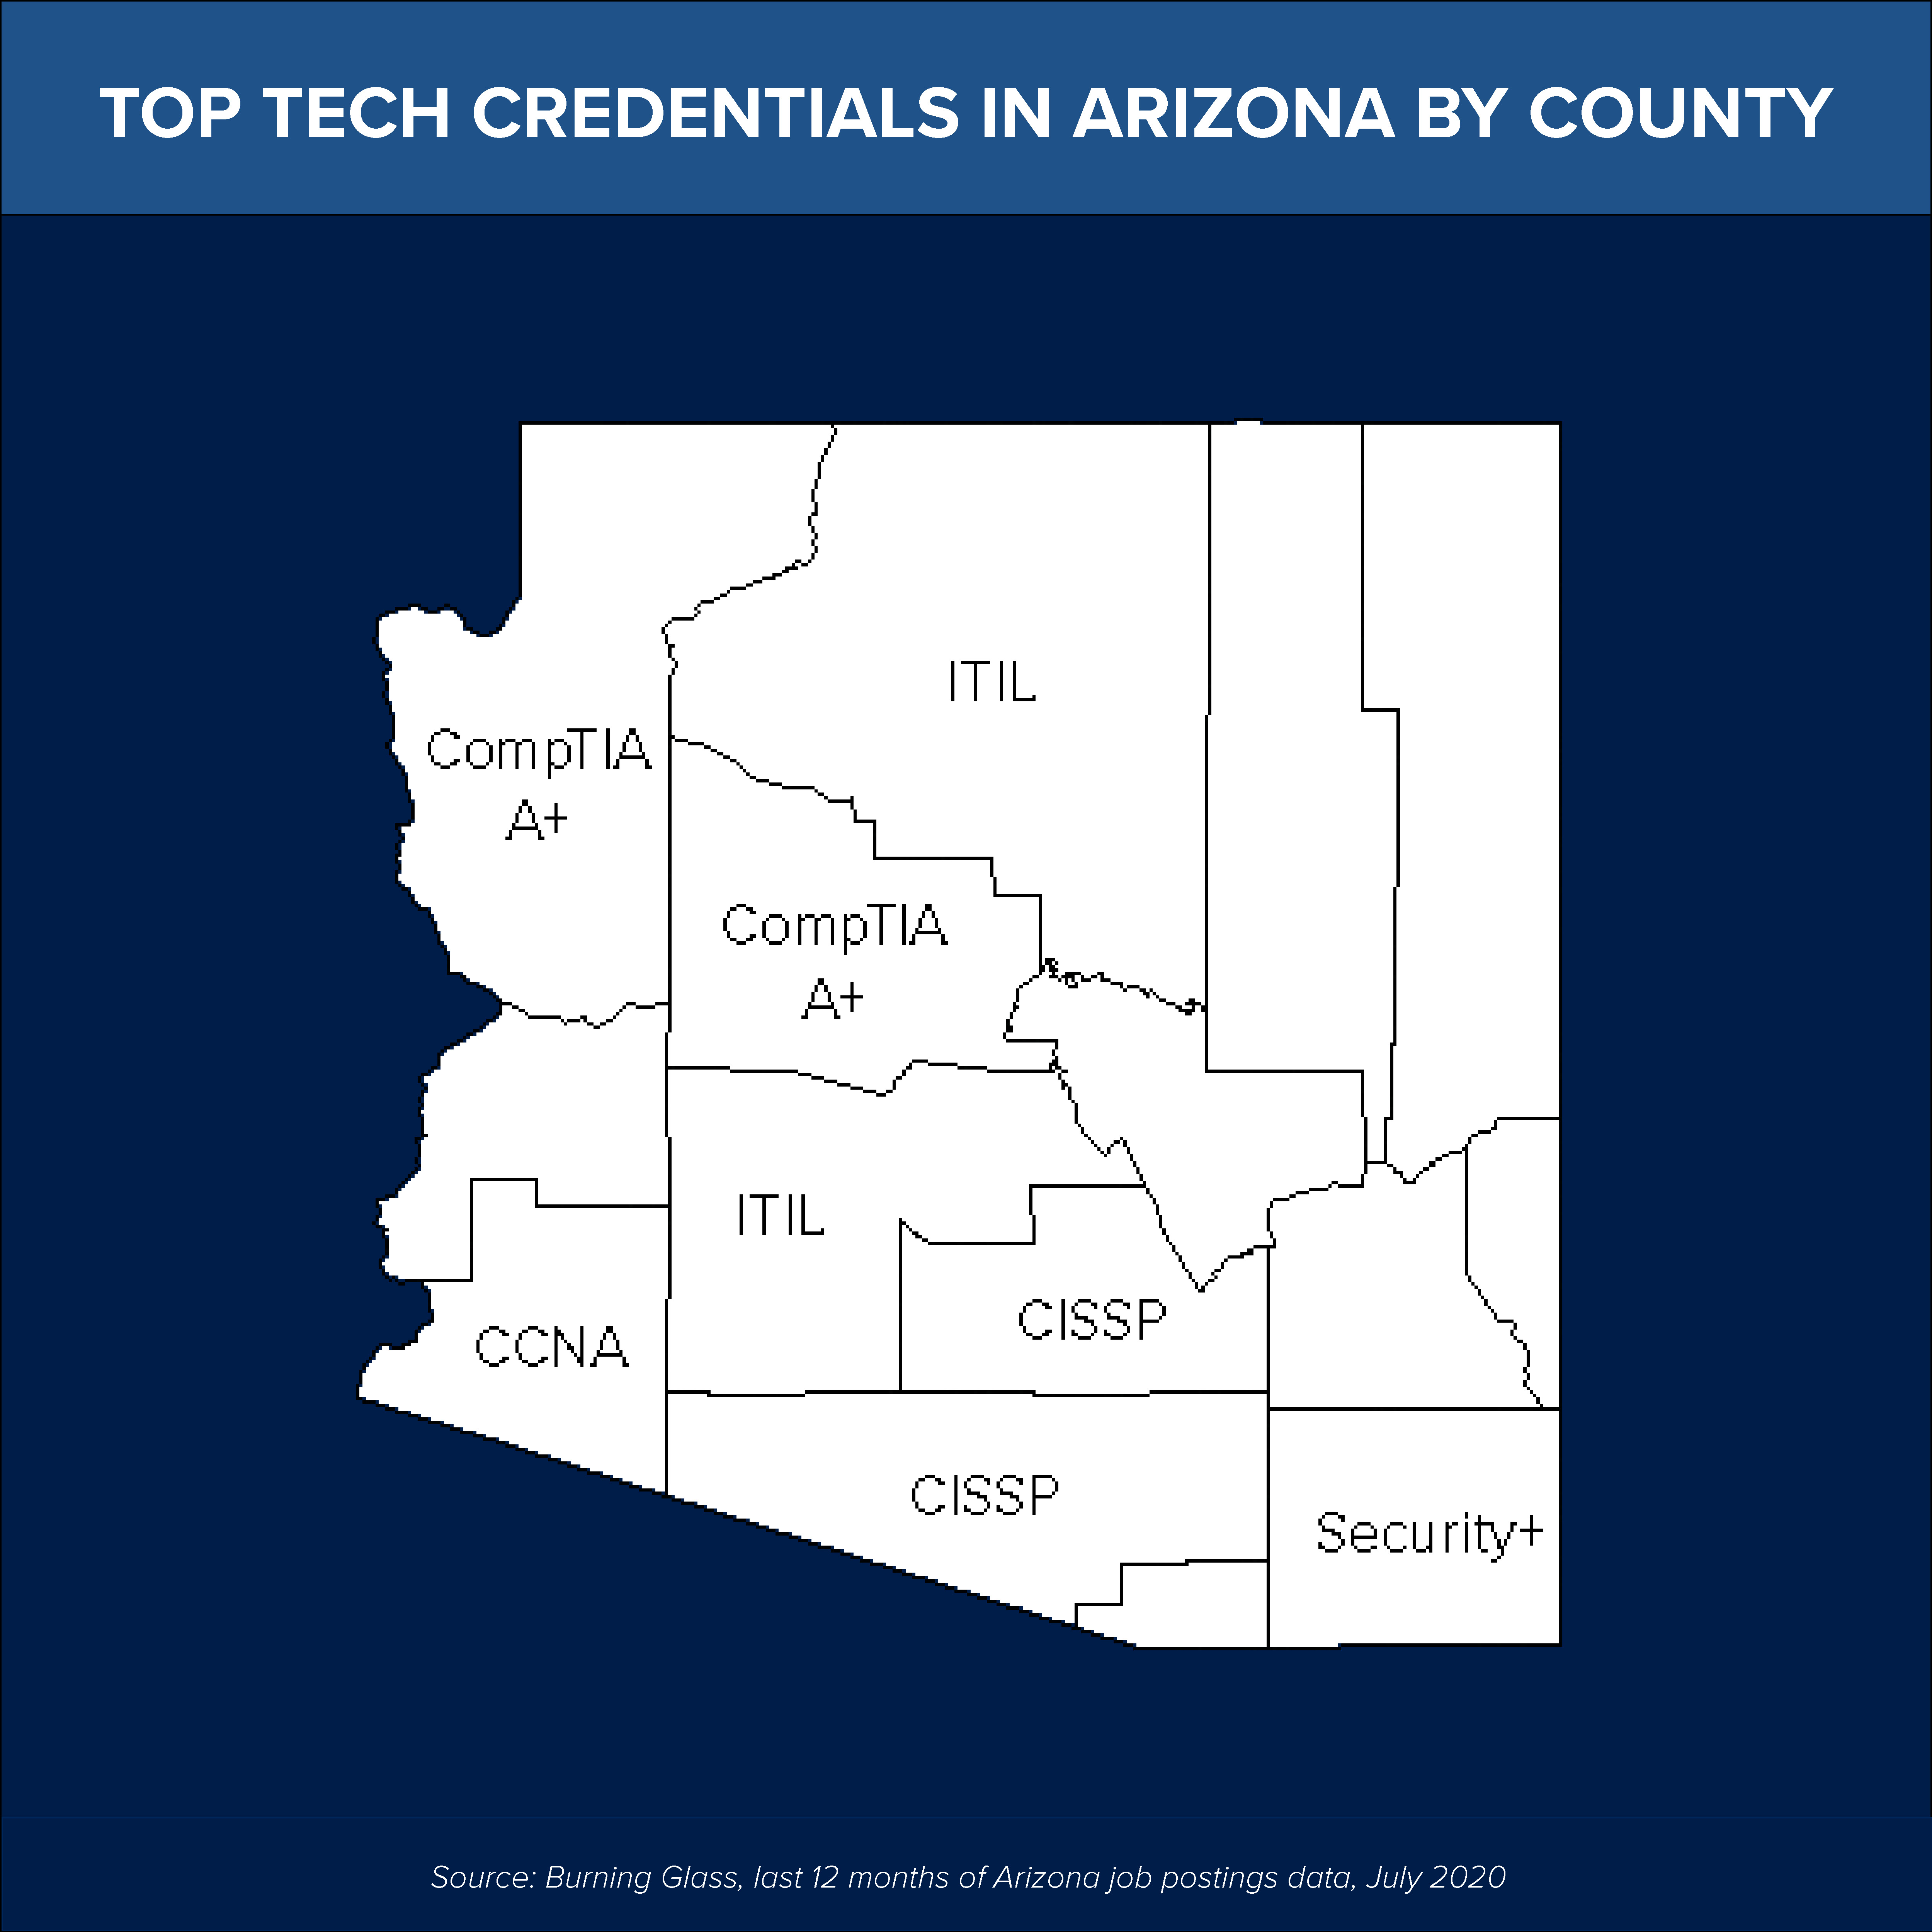 Map of Arizona showing top tech credentials by county